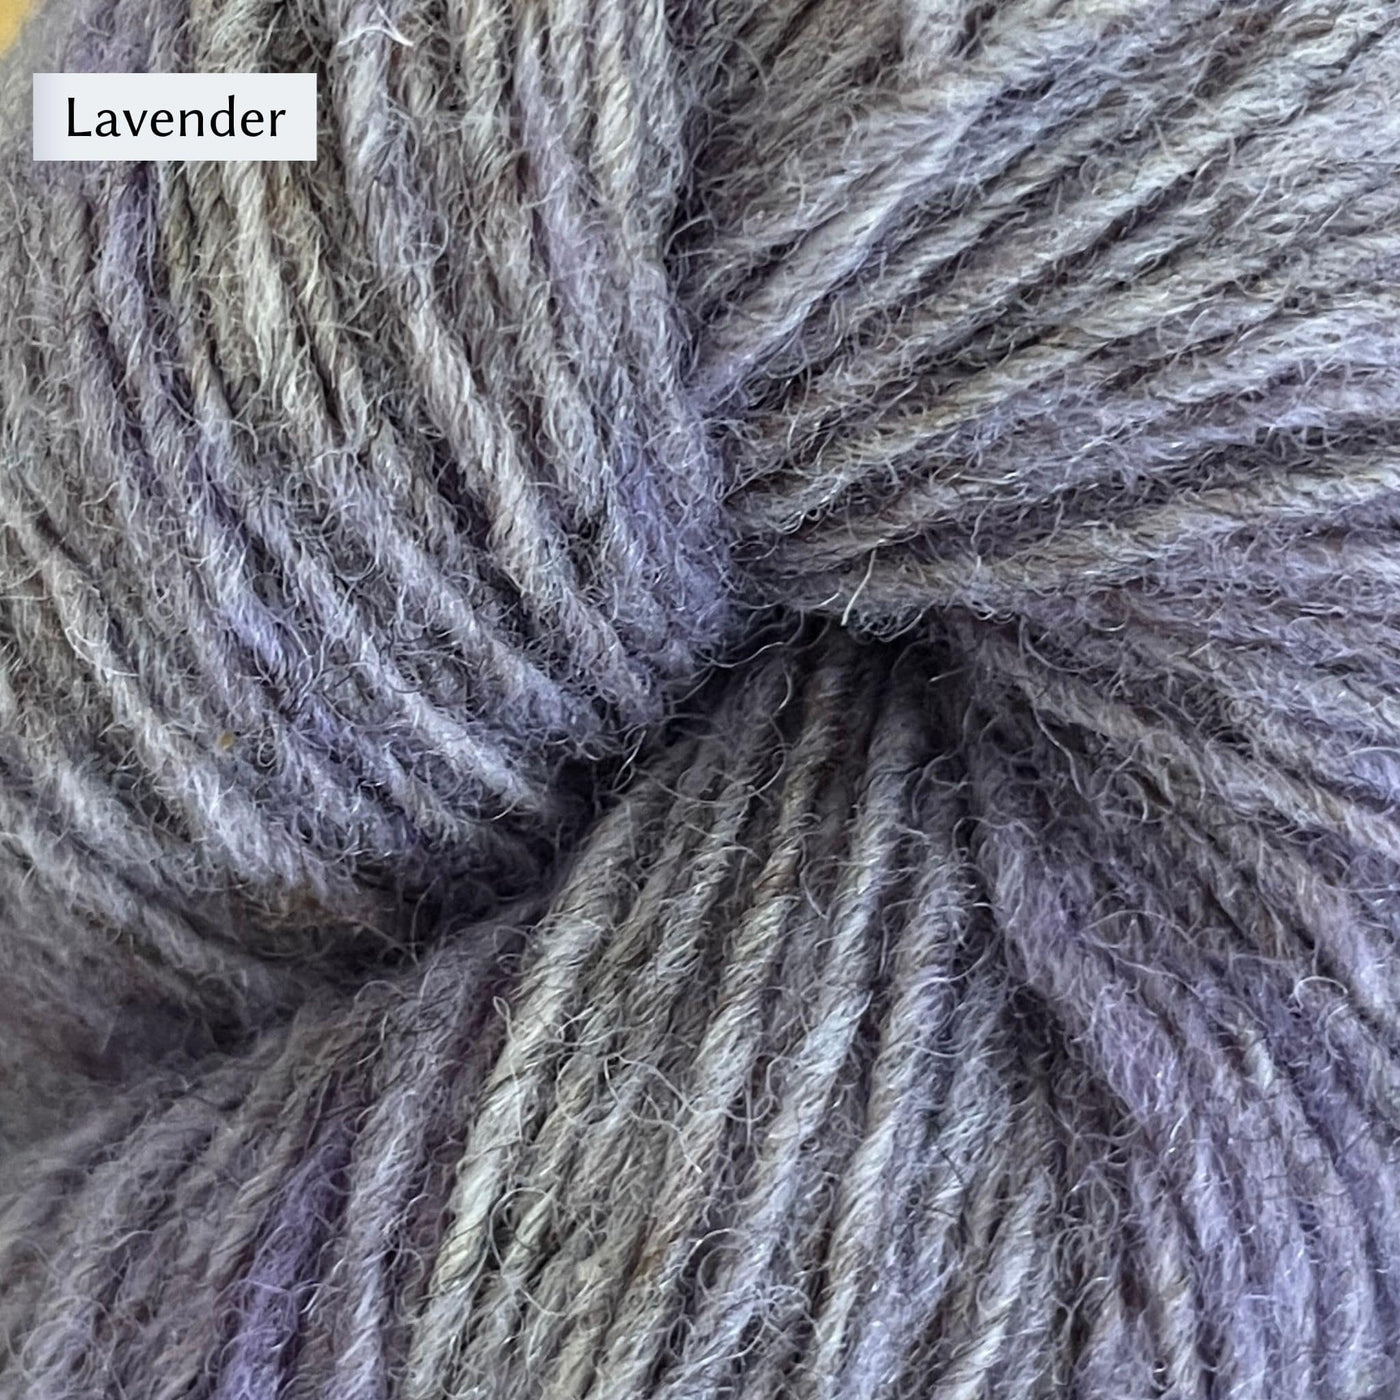 Lichen & Lace Rustic Heather Sport, a sport weight single-ply yarn, in Lavender, a heathered light purple